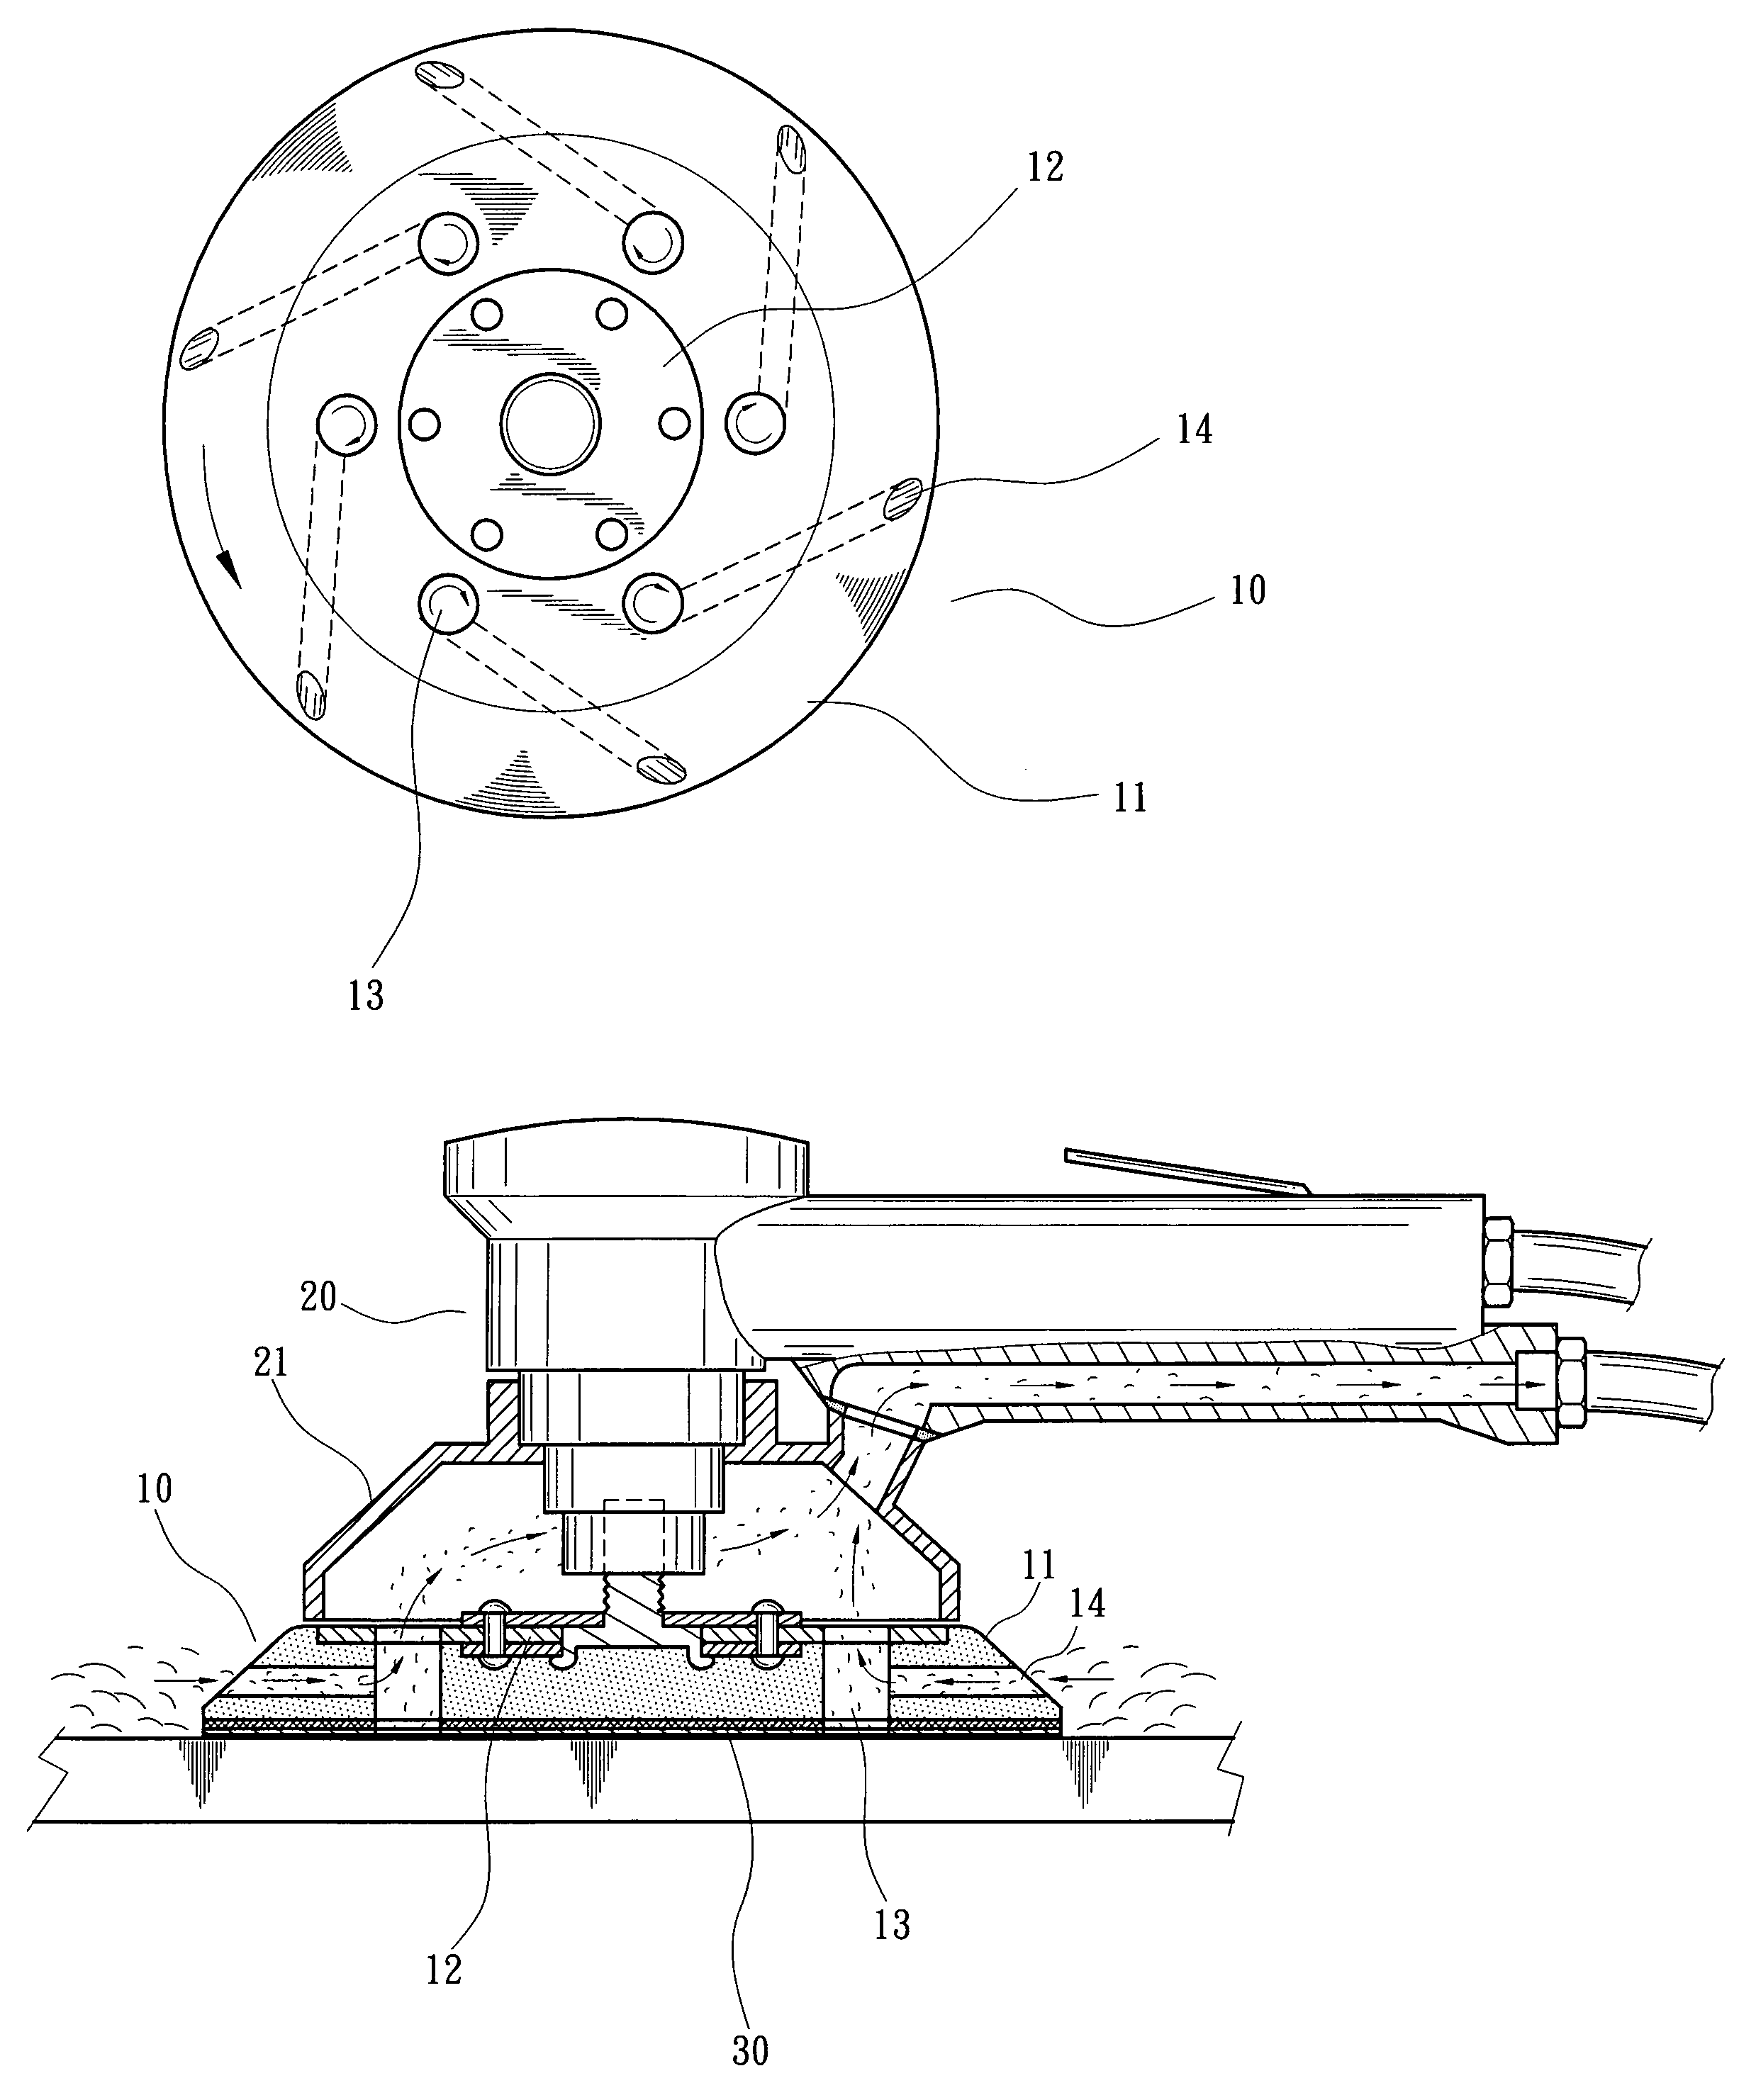 Grinding disc structure